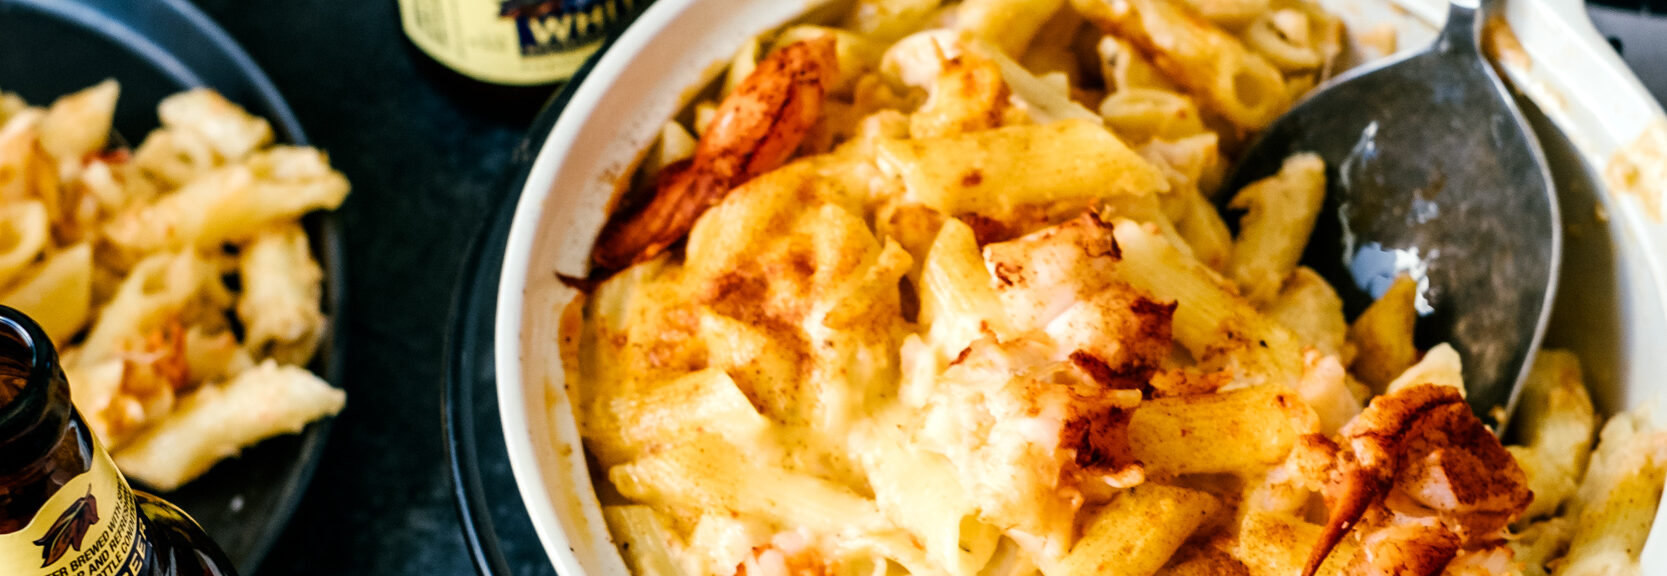 Maine Lobster Mac and Cheese with Allagash Pairing recipe image